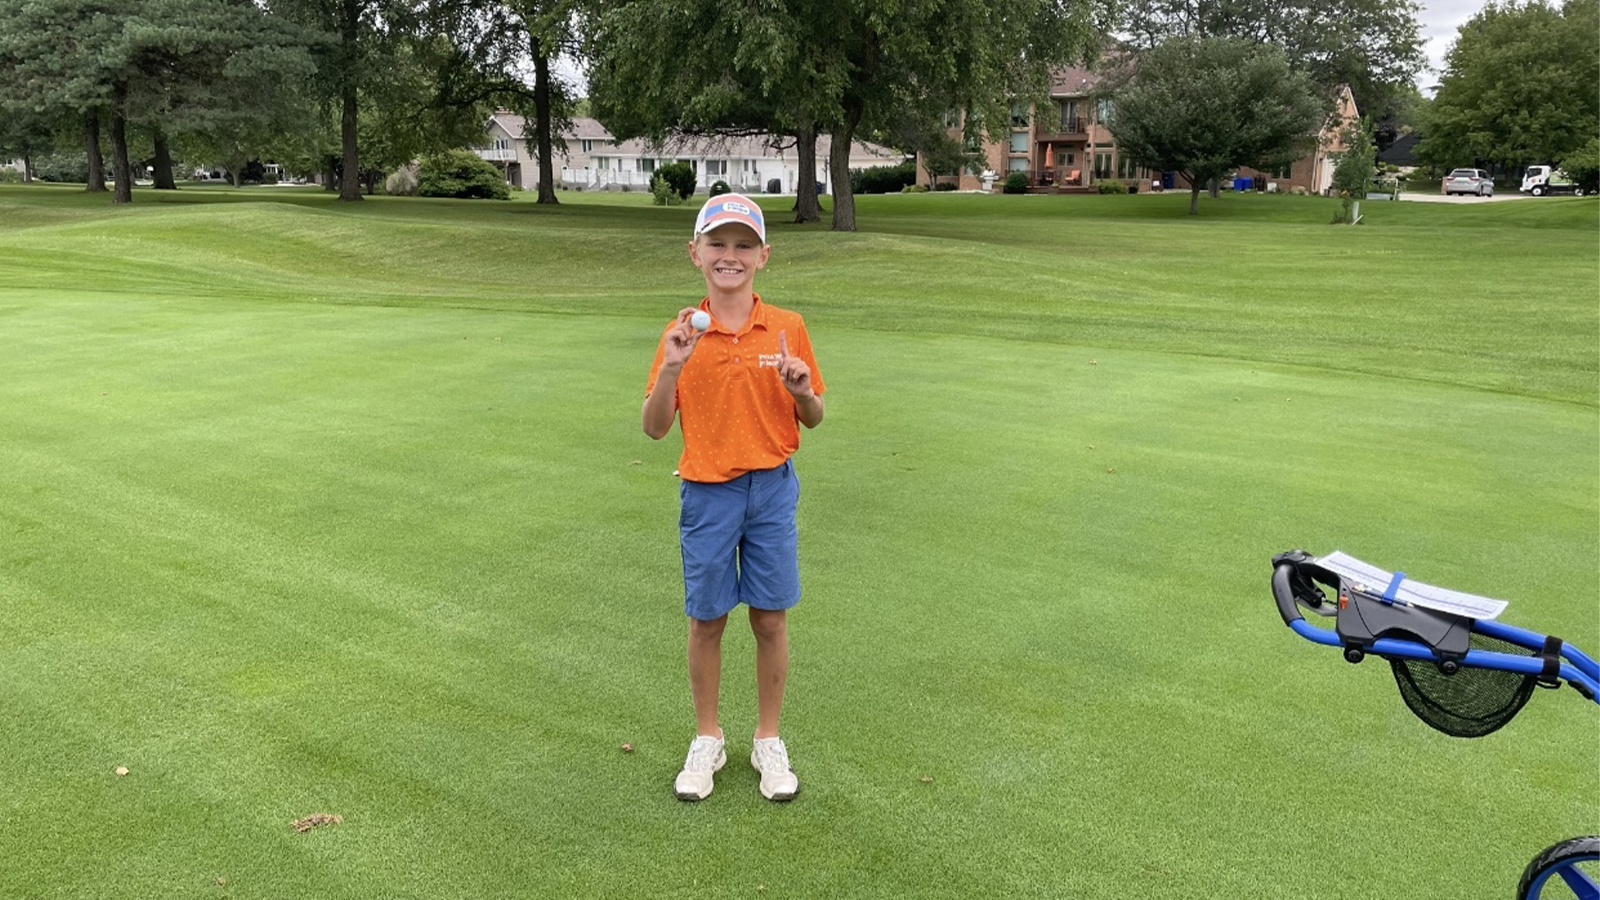 Carter Dingel made an ACE on the 8th hole at Sunnyside Golf & Country Club during the Iowa PGA Section PGA Jr. League Sub-Regional Competitions.